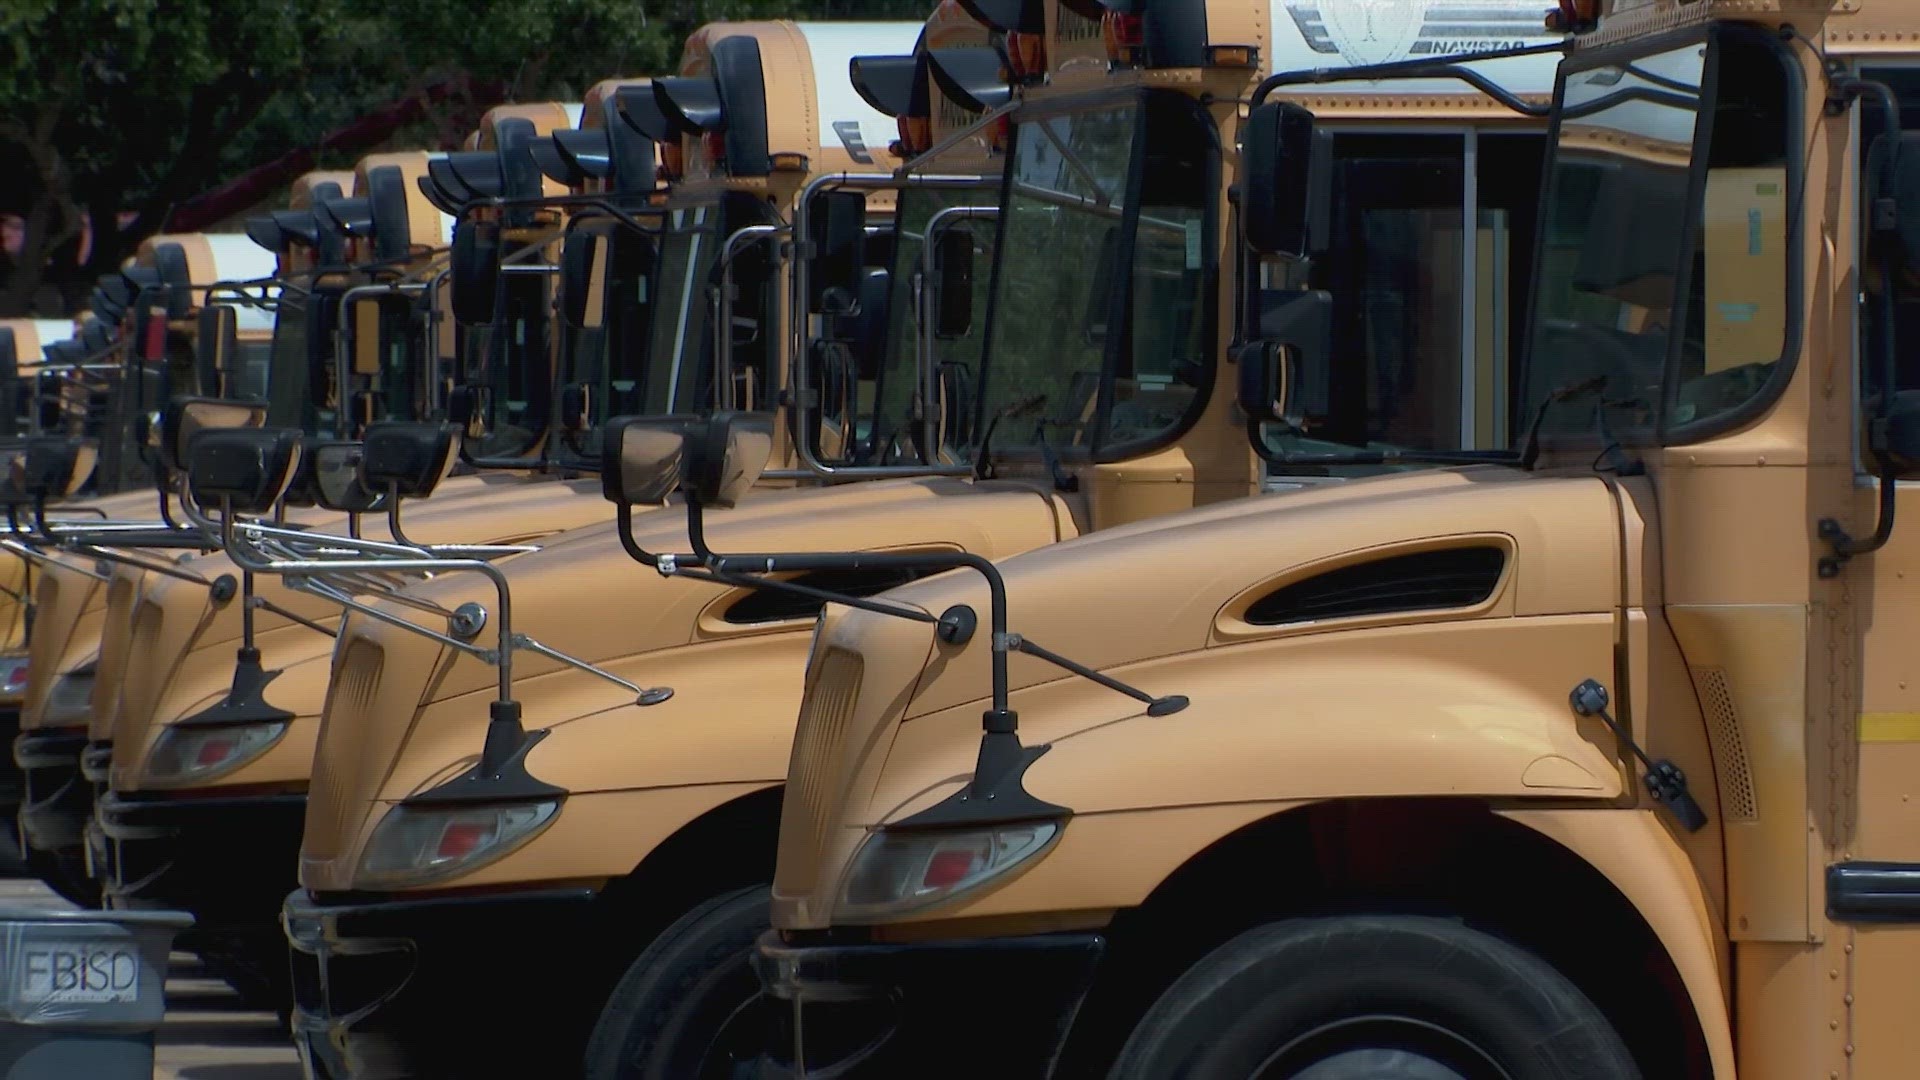 “We have about 48 routes that don’t have a driver assigned to it right now," a Fort Bend ISD official said.